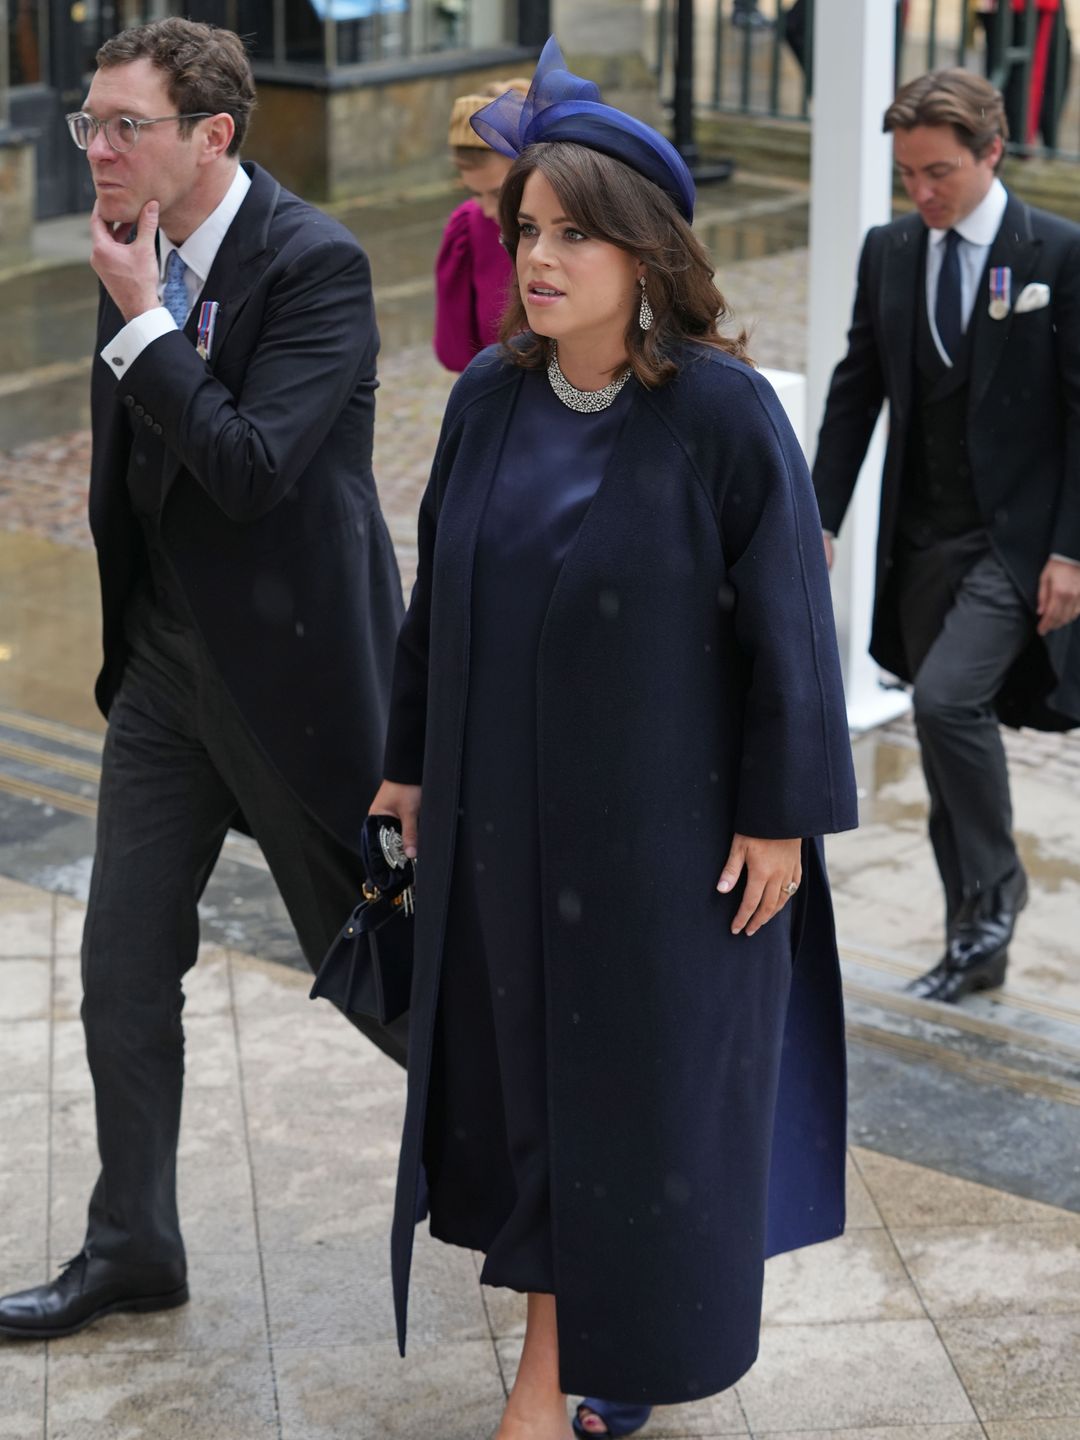 Princess Eugenie looked stunning in navy blue